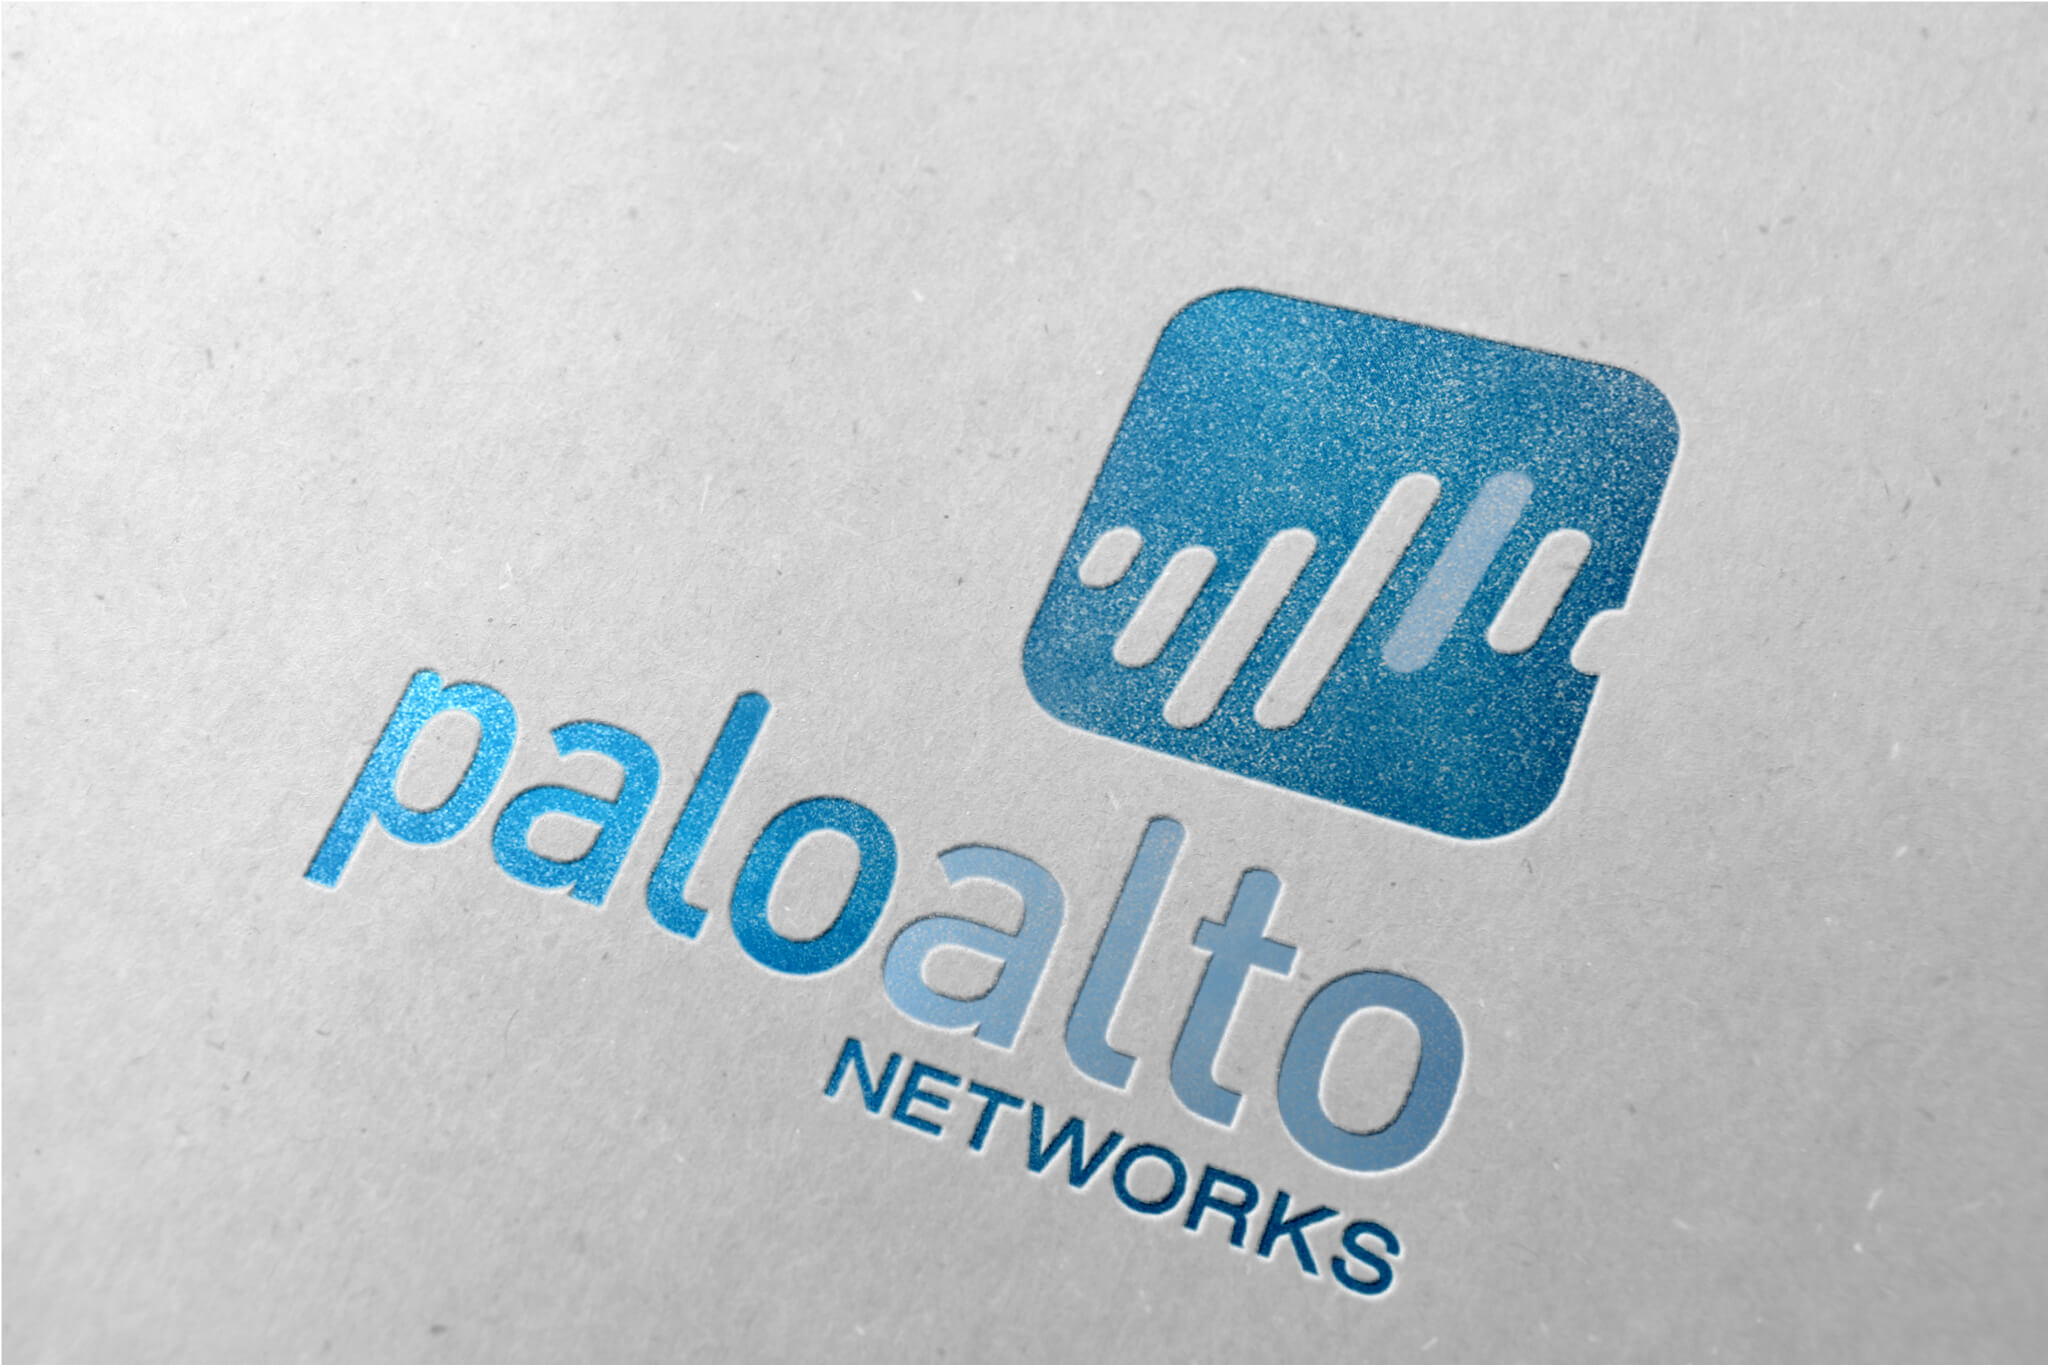 EDU-214 – Palo Alto Networks Improving Security Posture and FireWall Hardening